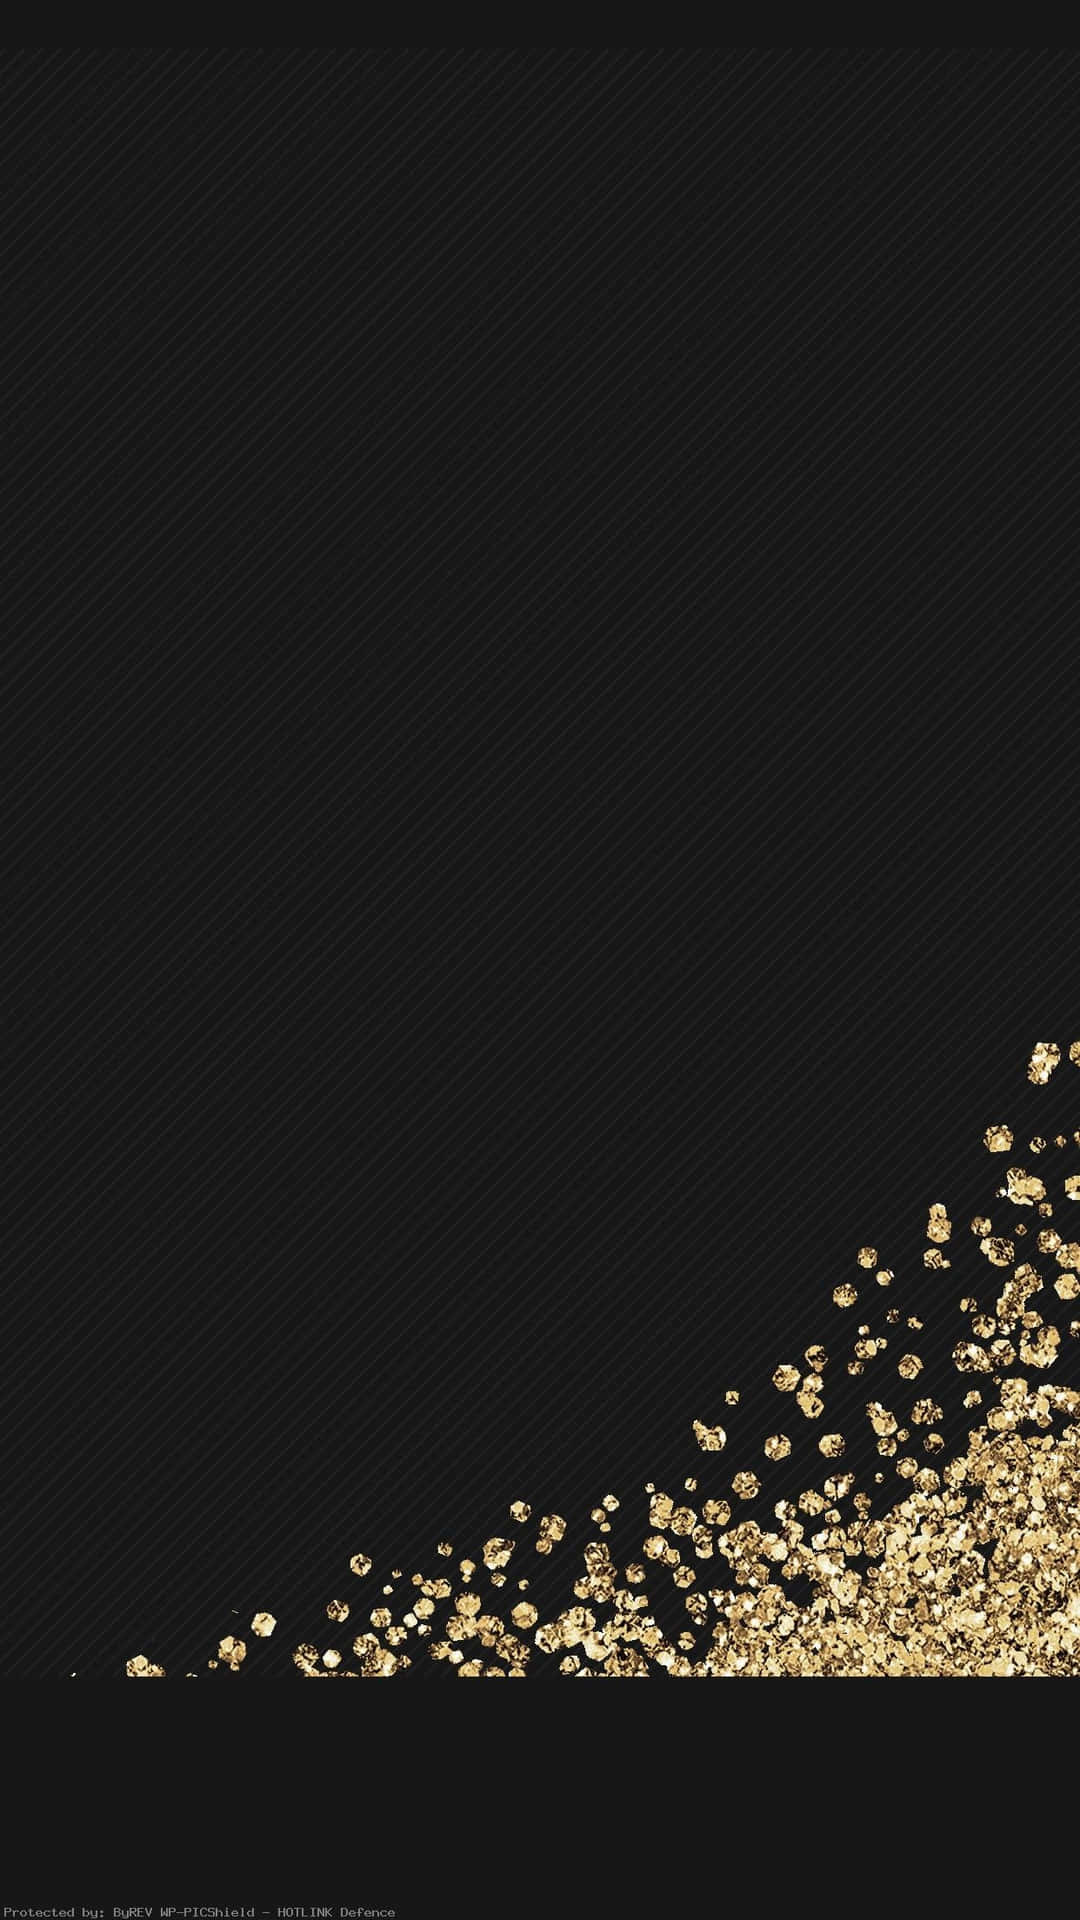 Gold Flakes Falling On A Black Background Wallpaper